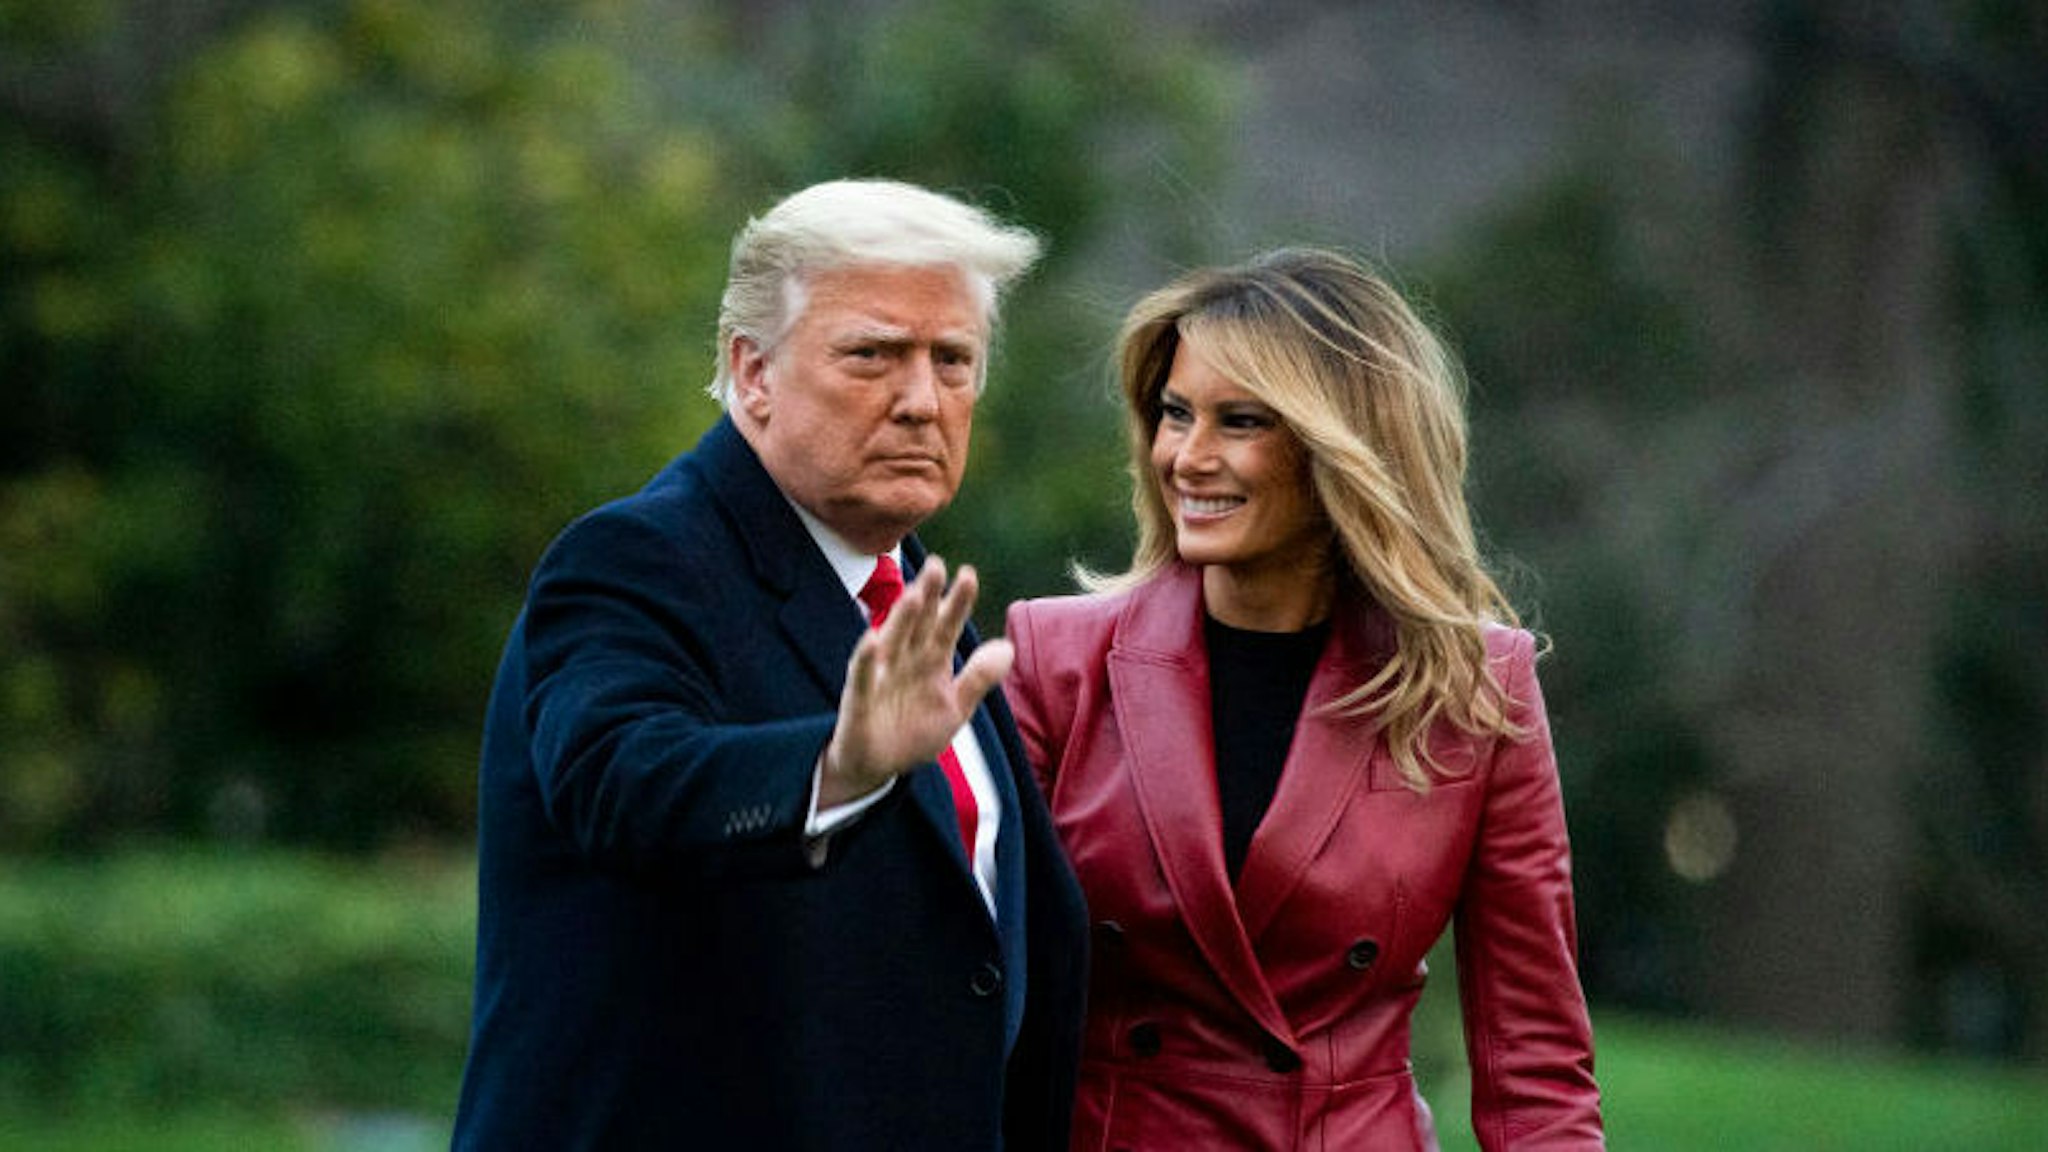 WASHINGTON, DC - DECEMBER 05: U.S. President Donald Trump waves as he walks with First lady Melania Trump as they depart on the South Lawn of the White House, on December 5, 2020 in Washington, DC. Trump is traveling to Georgia to hold a rally.